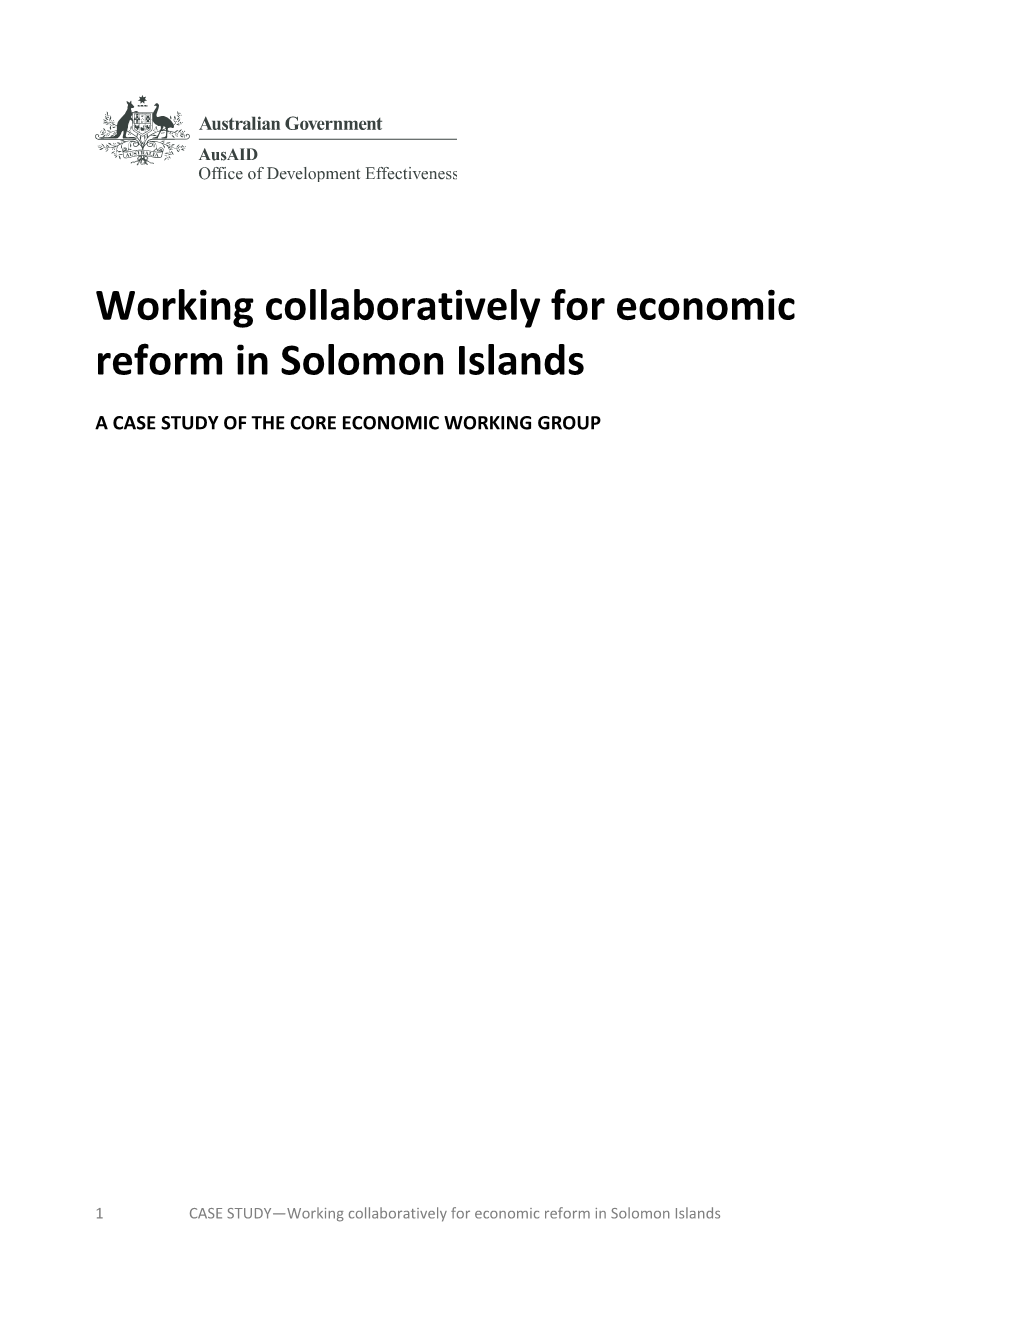 Working Collaboratively for Economic Reform in Solomon Islands